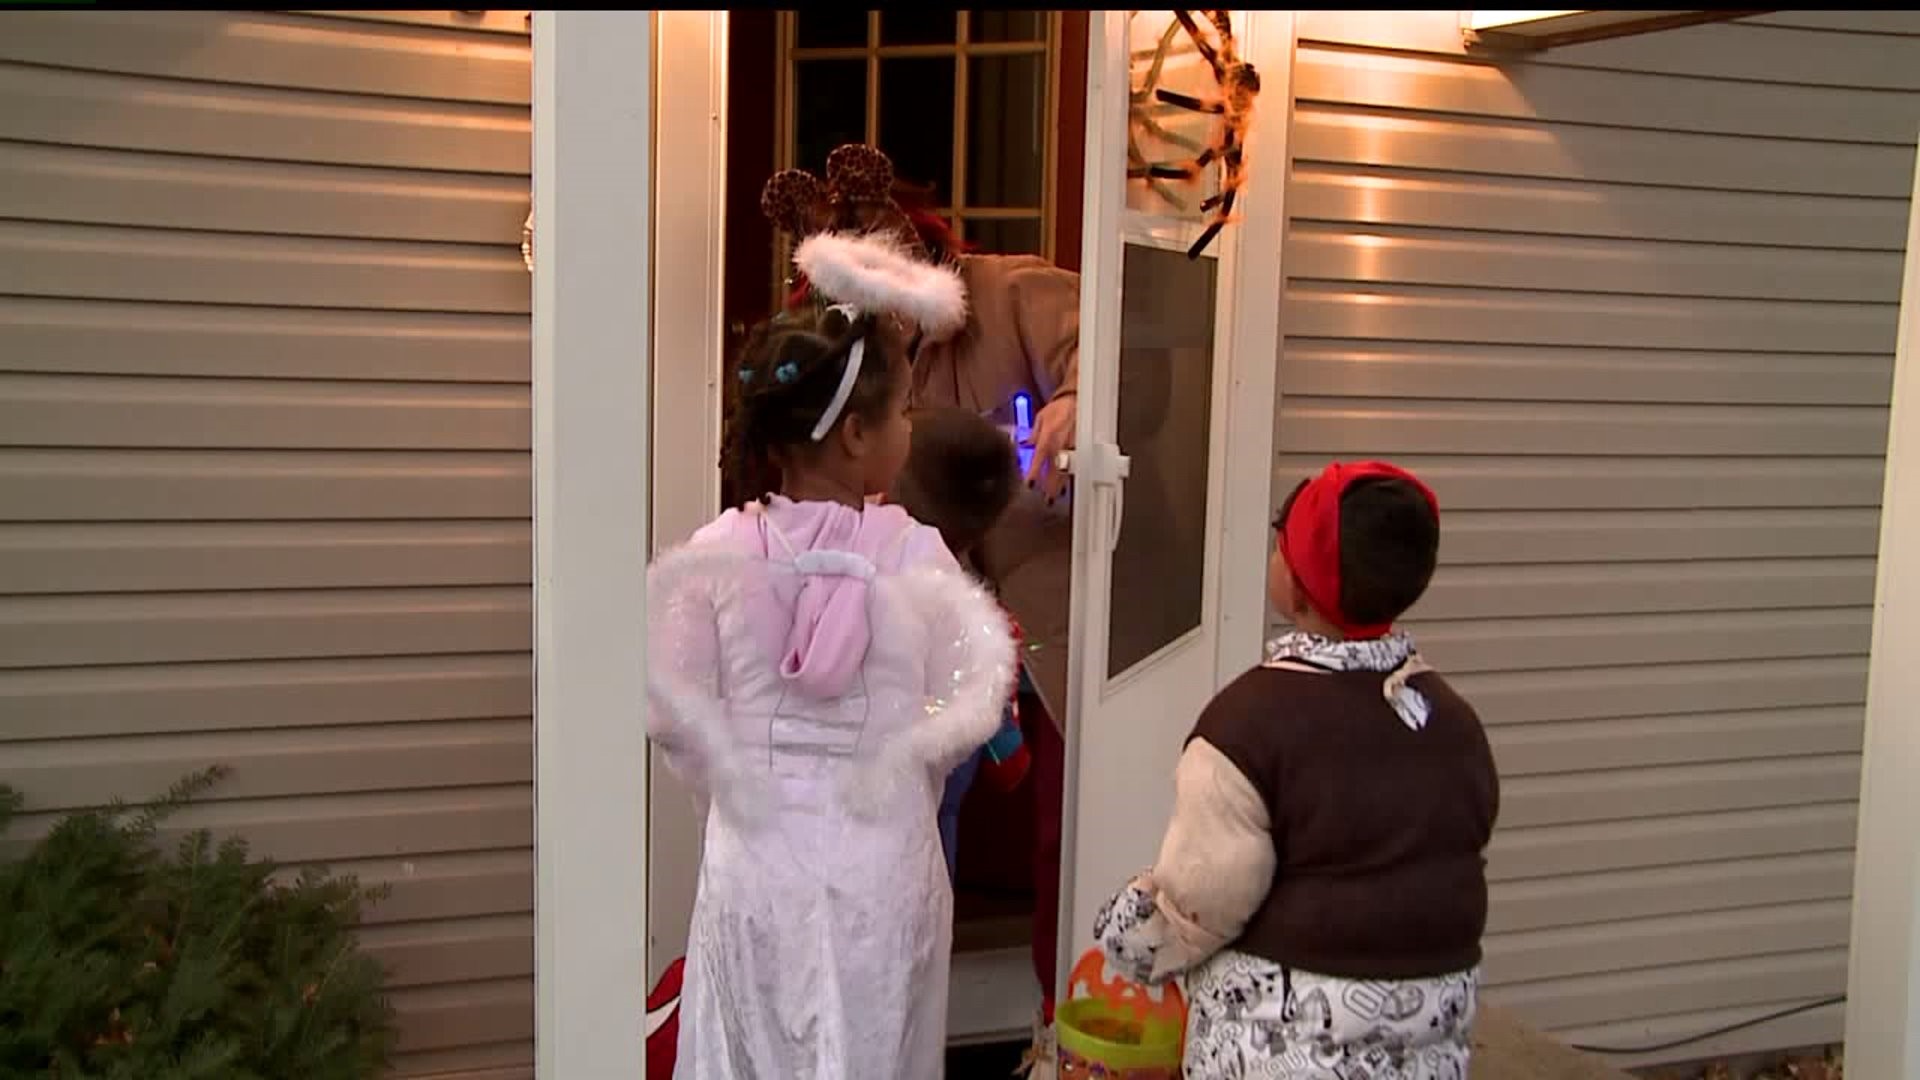 Safety tips to keep in mind before Trick or Treating this year